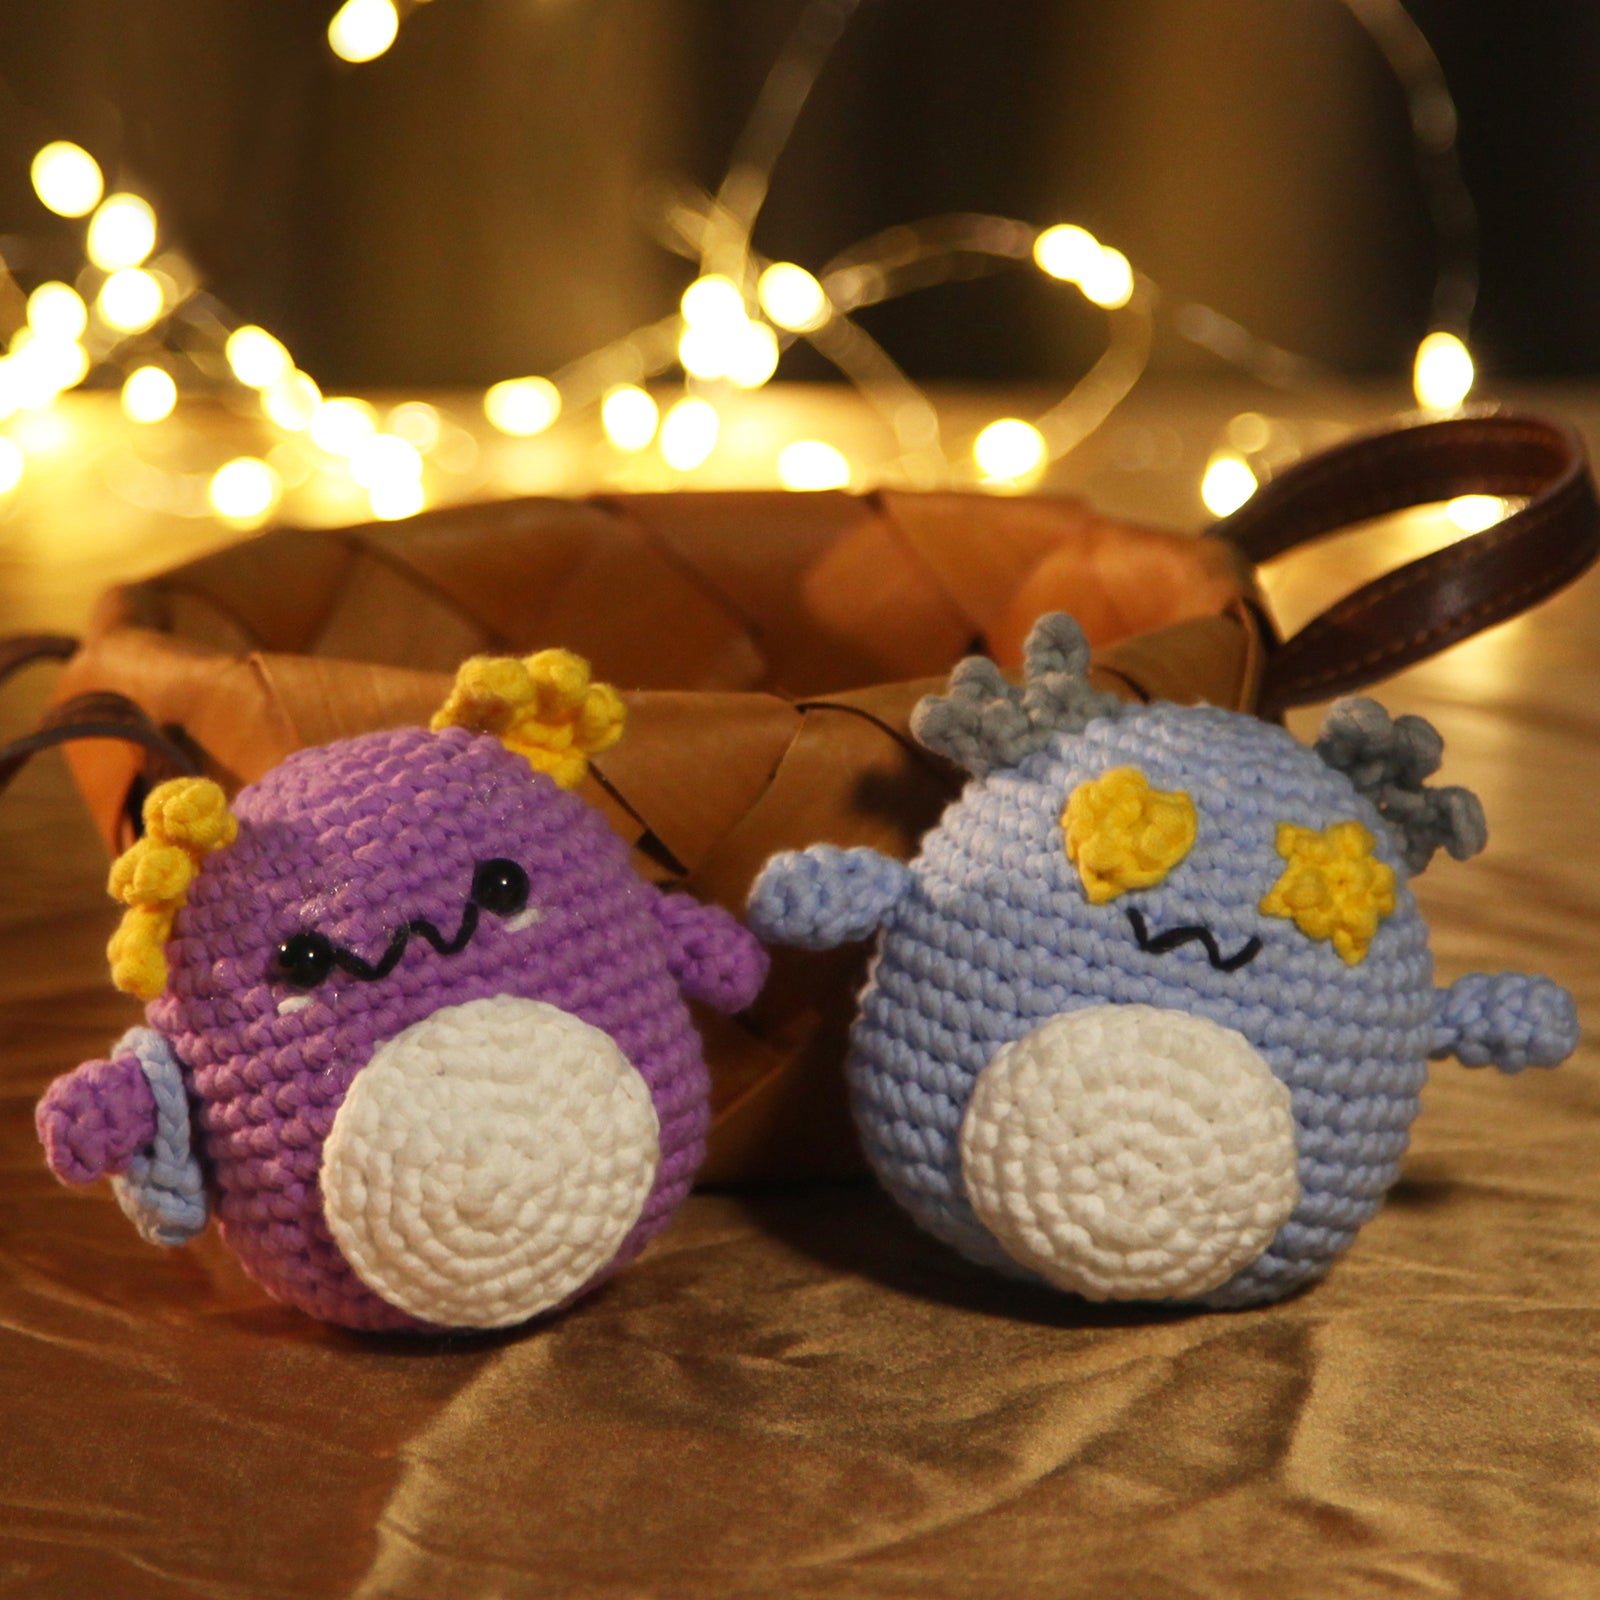 Crochet Kit for Be Axolotl Crochet Kit, Create Your First Amigurumi, Include Hook, Soft Yarn, and Accessories, Starter DIY Crafts for Adults, Teens